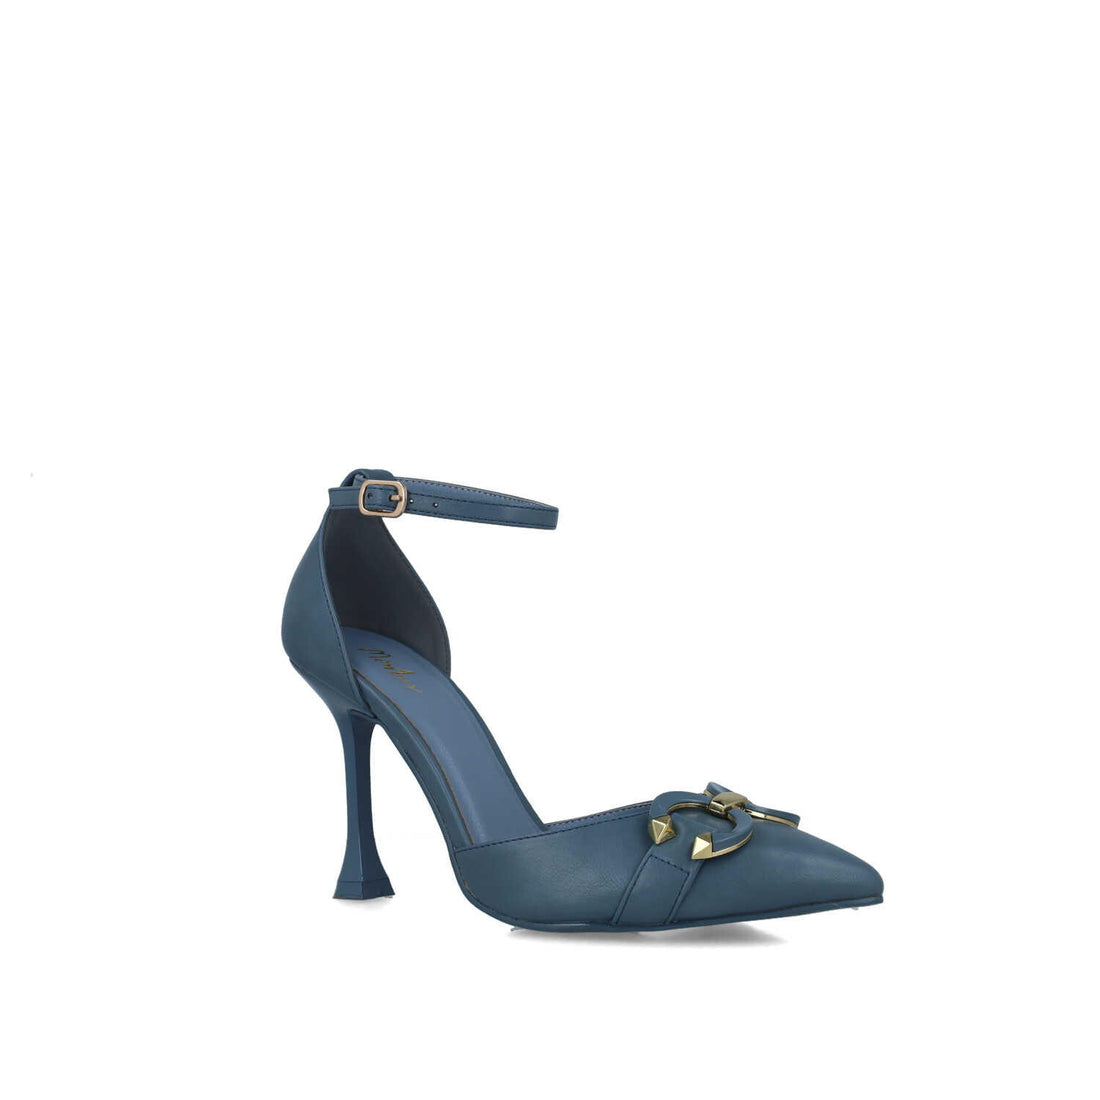 Jeans Pumps With Ankle Strap_25306_51_02